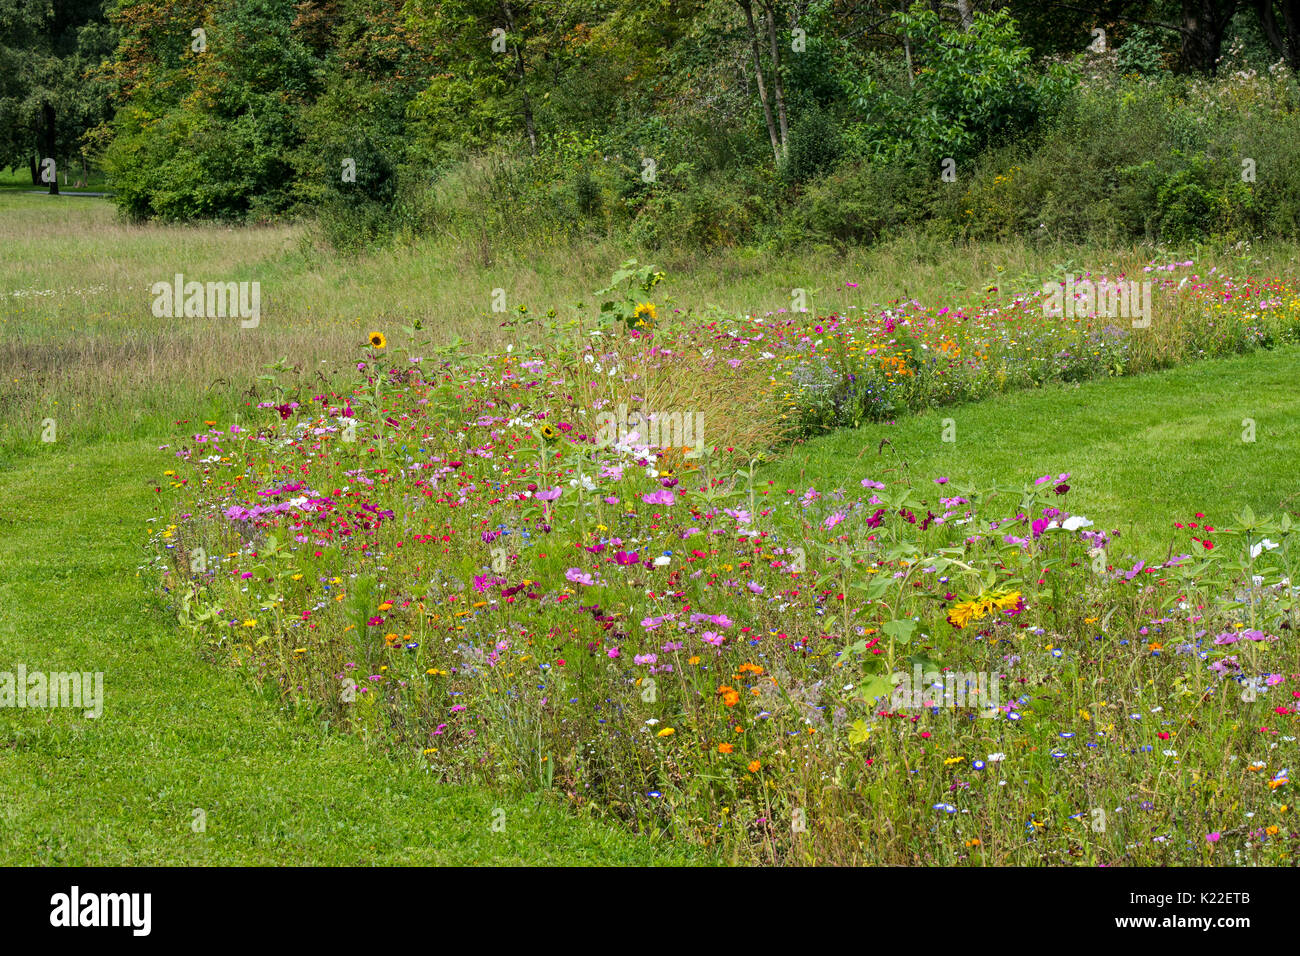 Mixture of colourful wildflowers in wildflower zone bordering grassland, planted to attract and help bees, butterflies and other pollinators Stock Photo